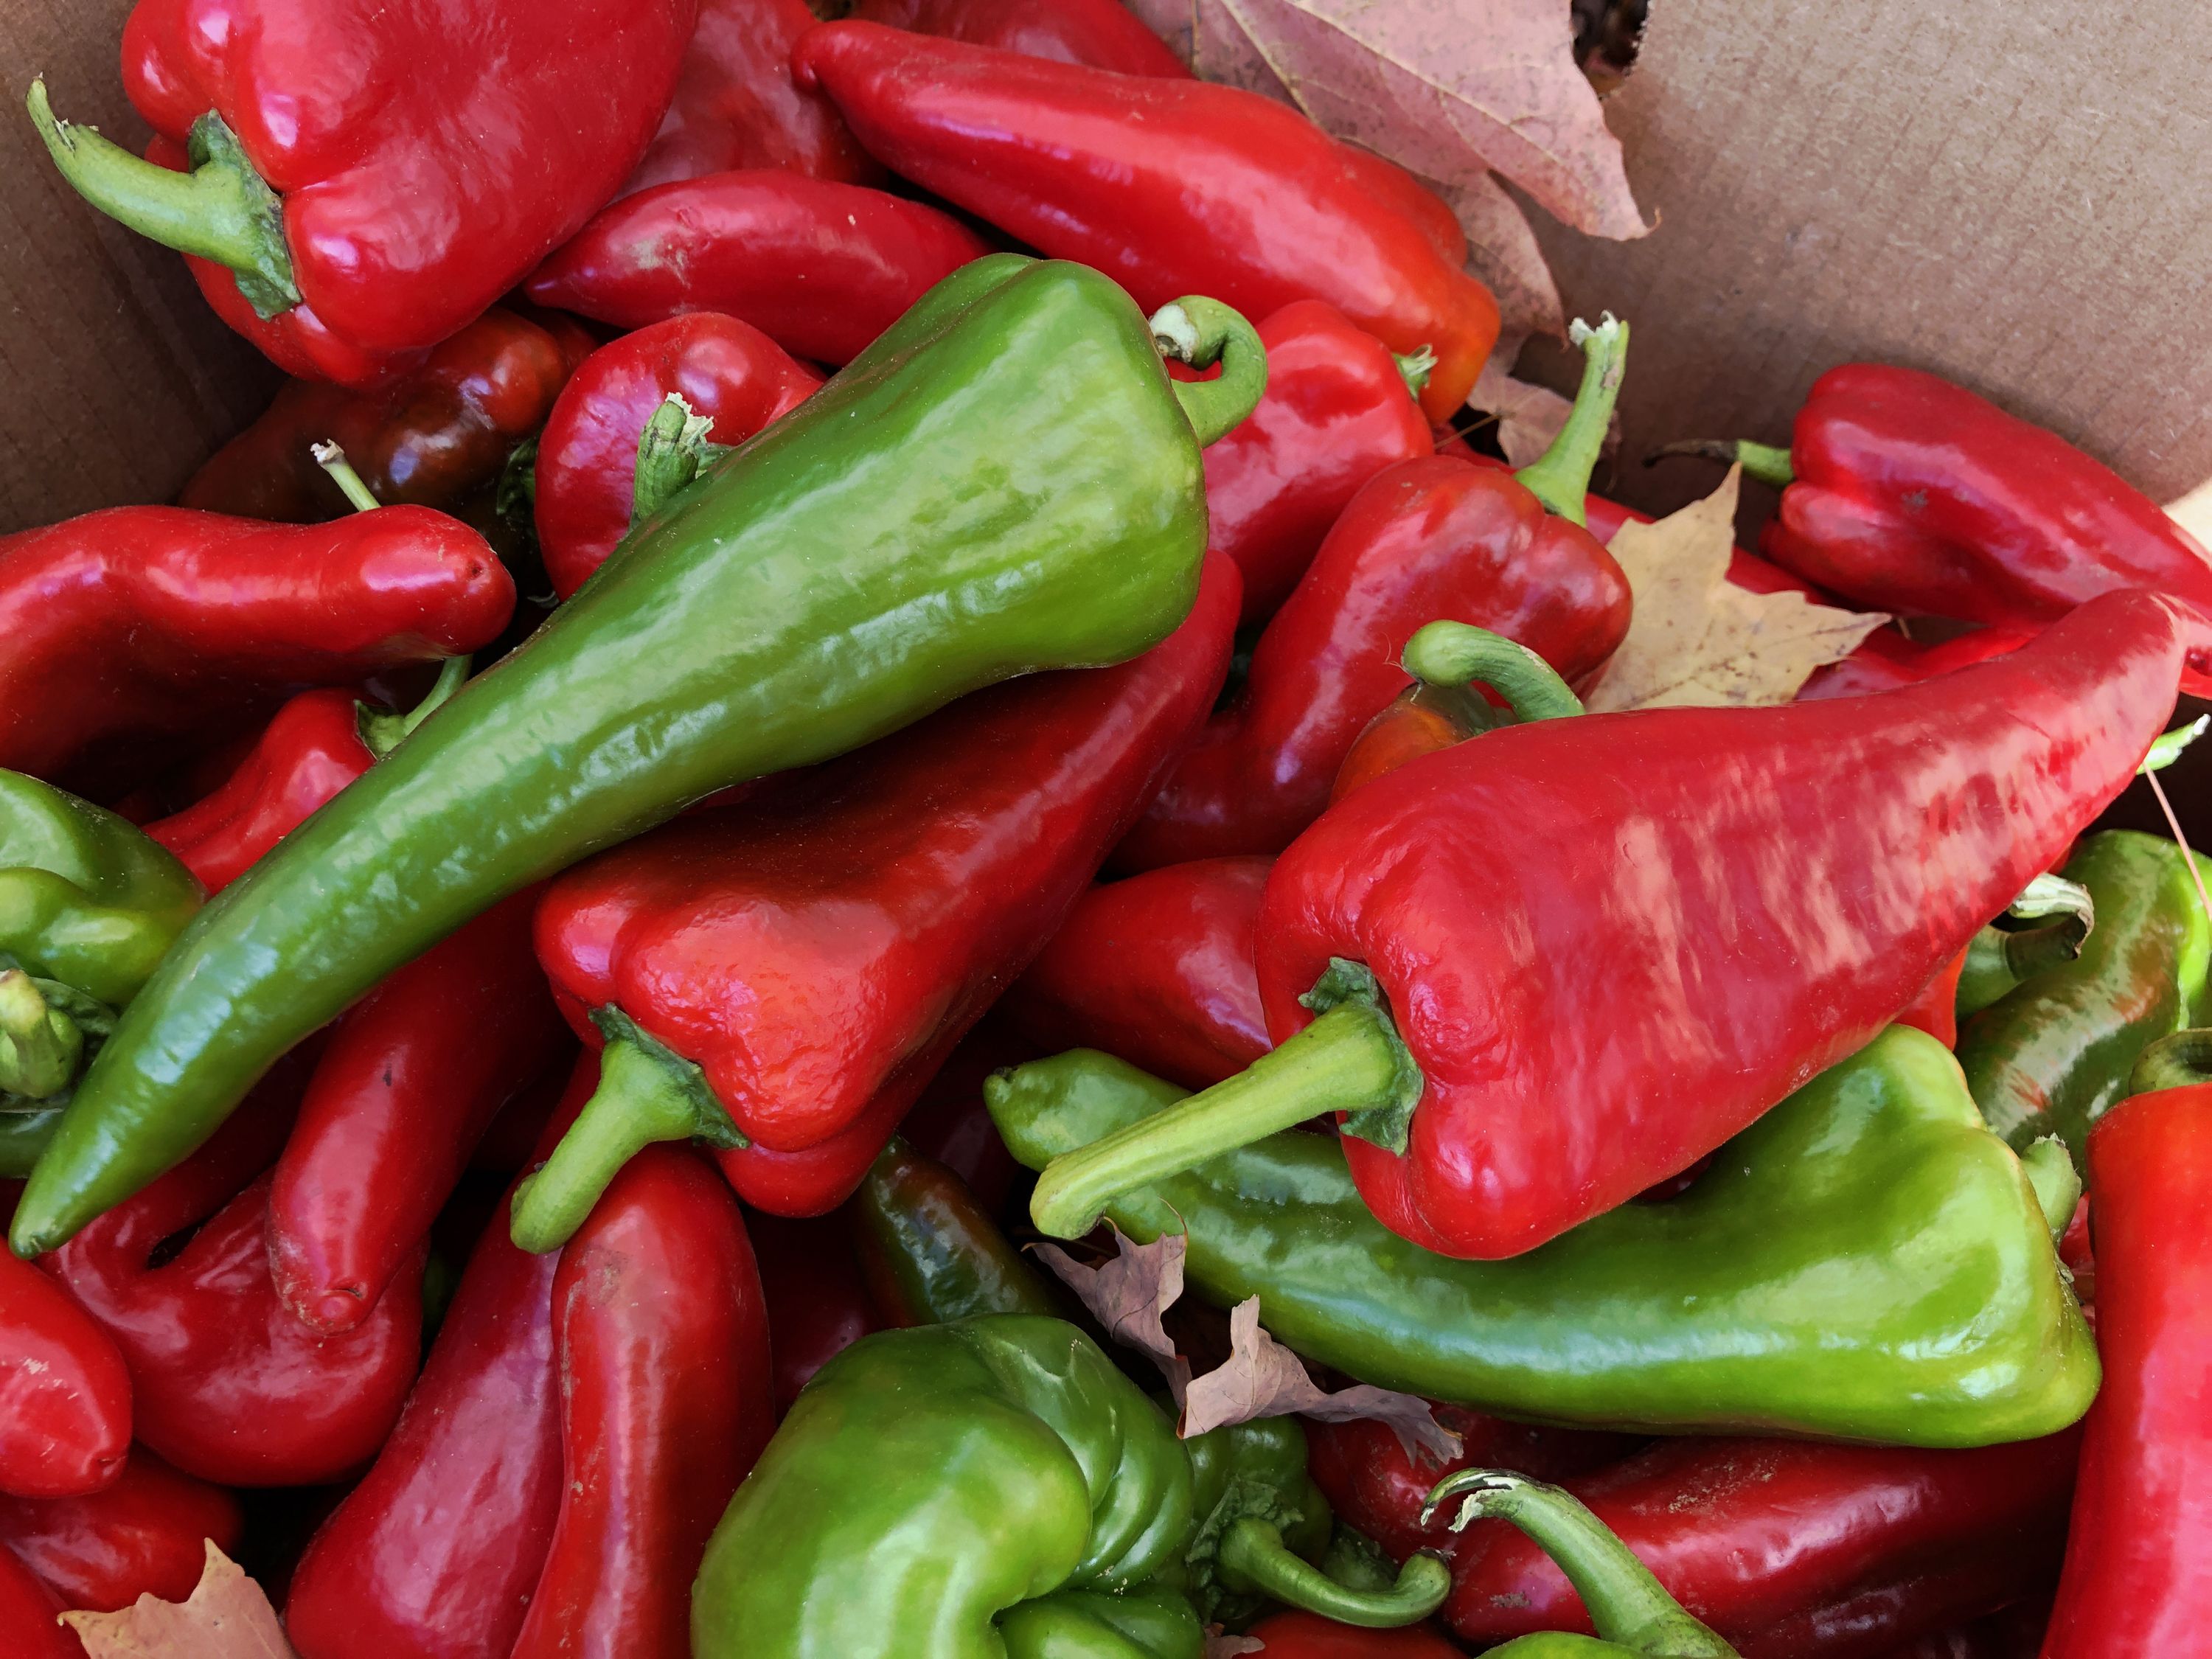 Types of Peppers - 10 Different Kinds of Peppers and Their Uses